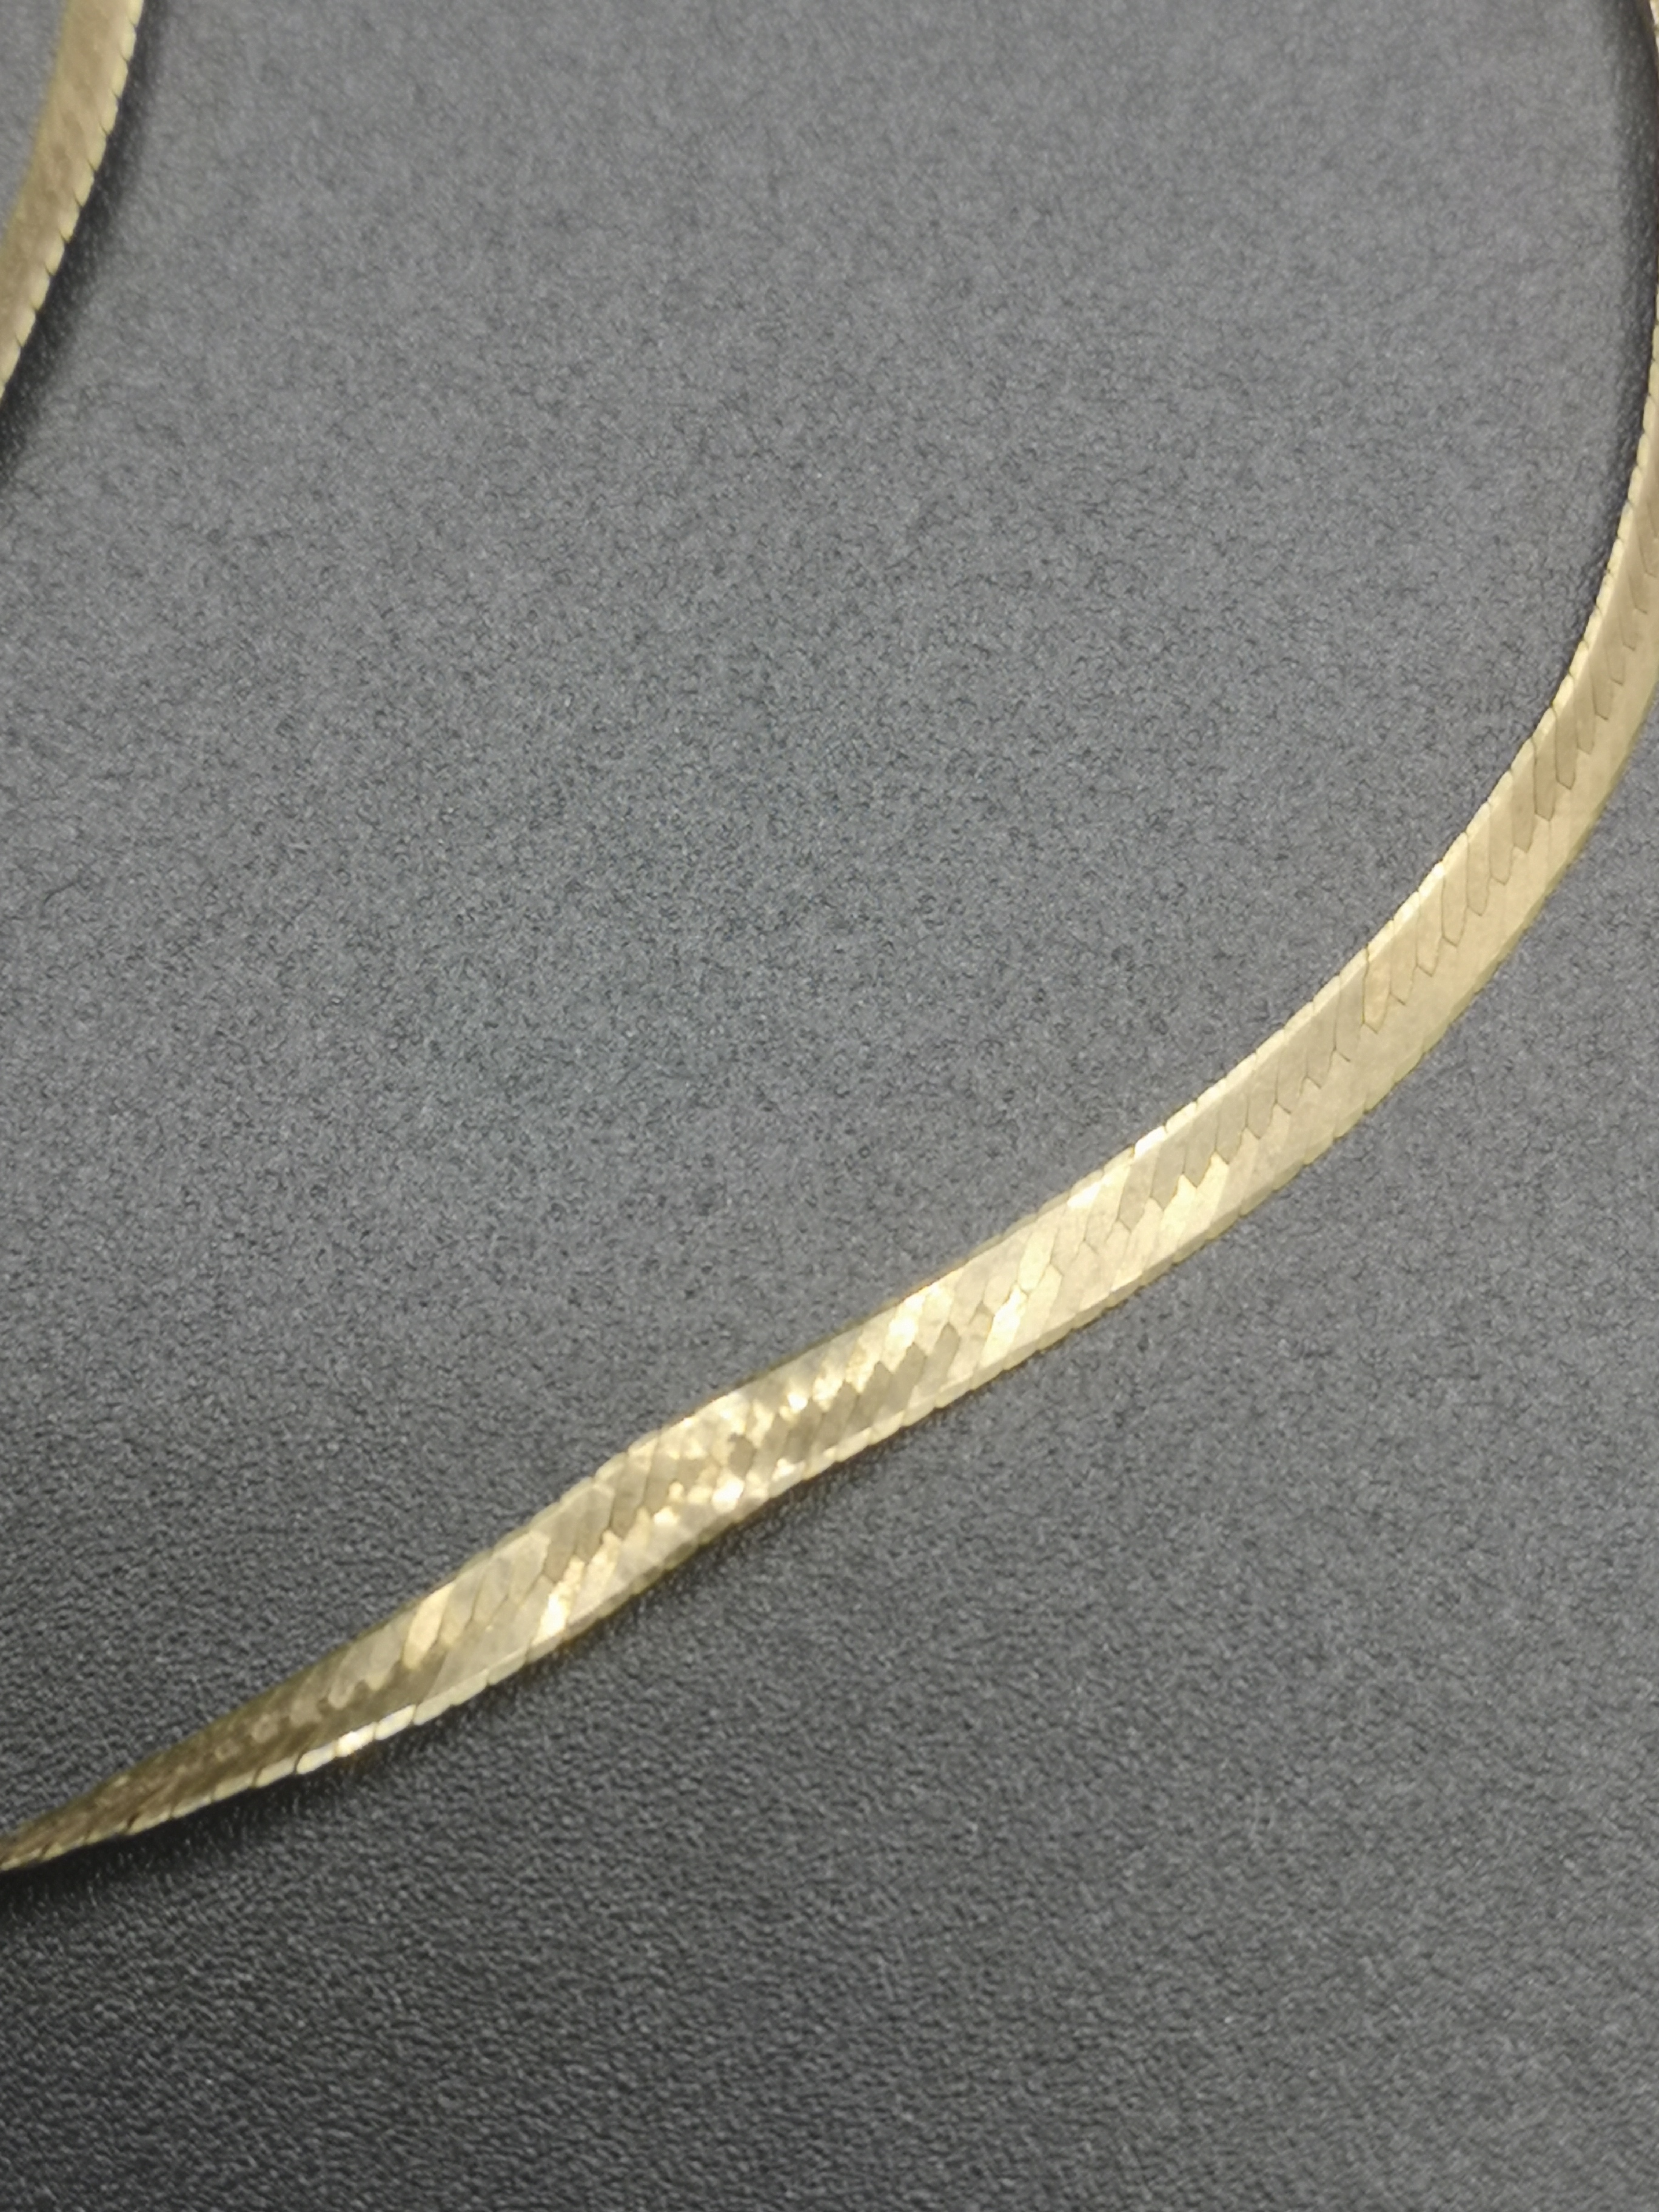 9ct gold necklace - Image 4 of 4